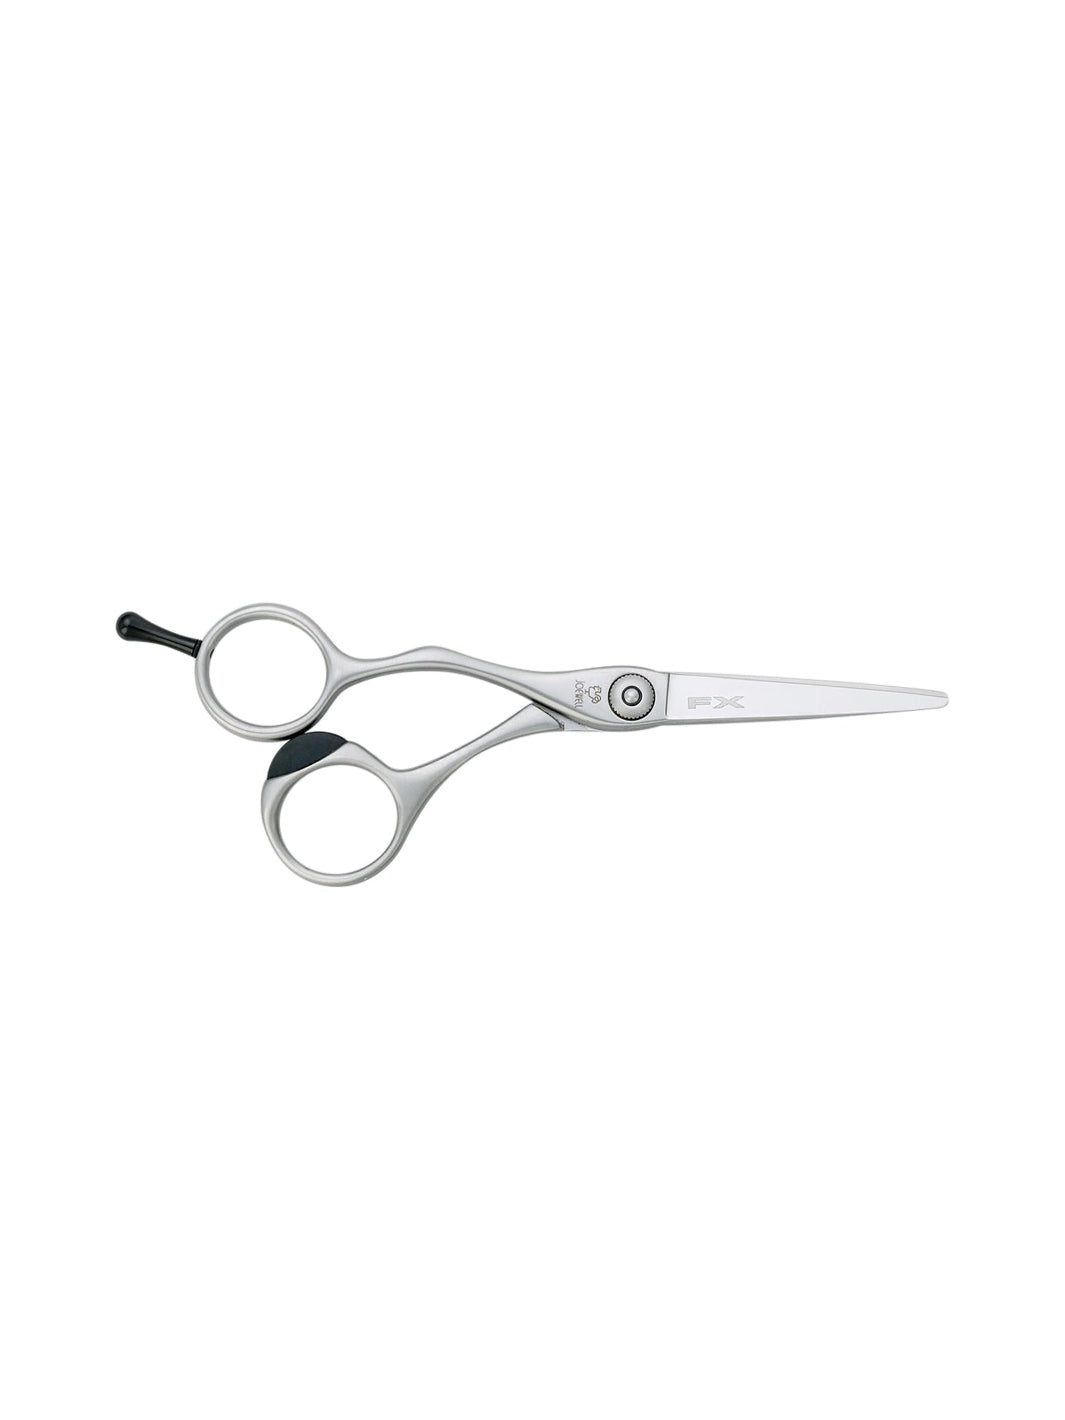 Super Alloy Flat Blade Left-handed Shears - FXL (5.5in)